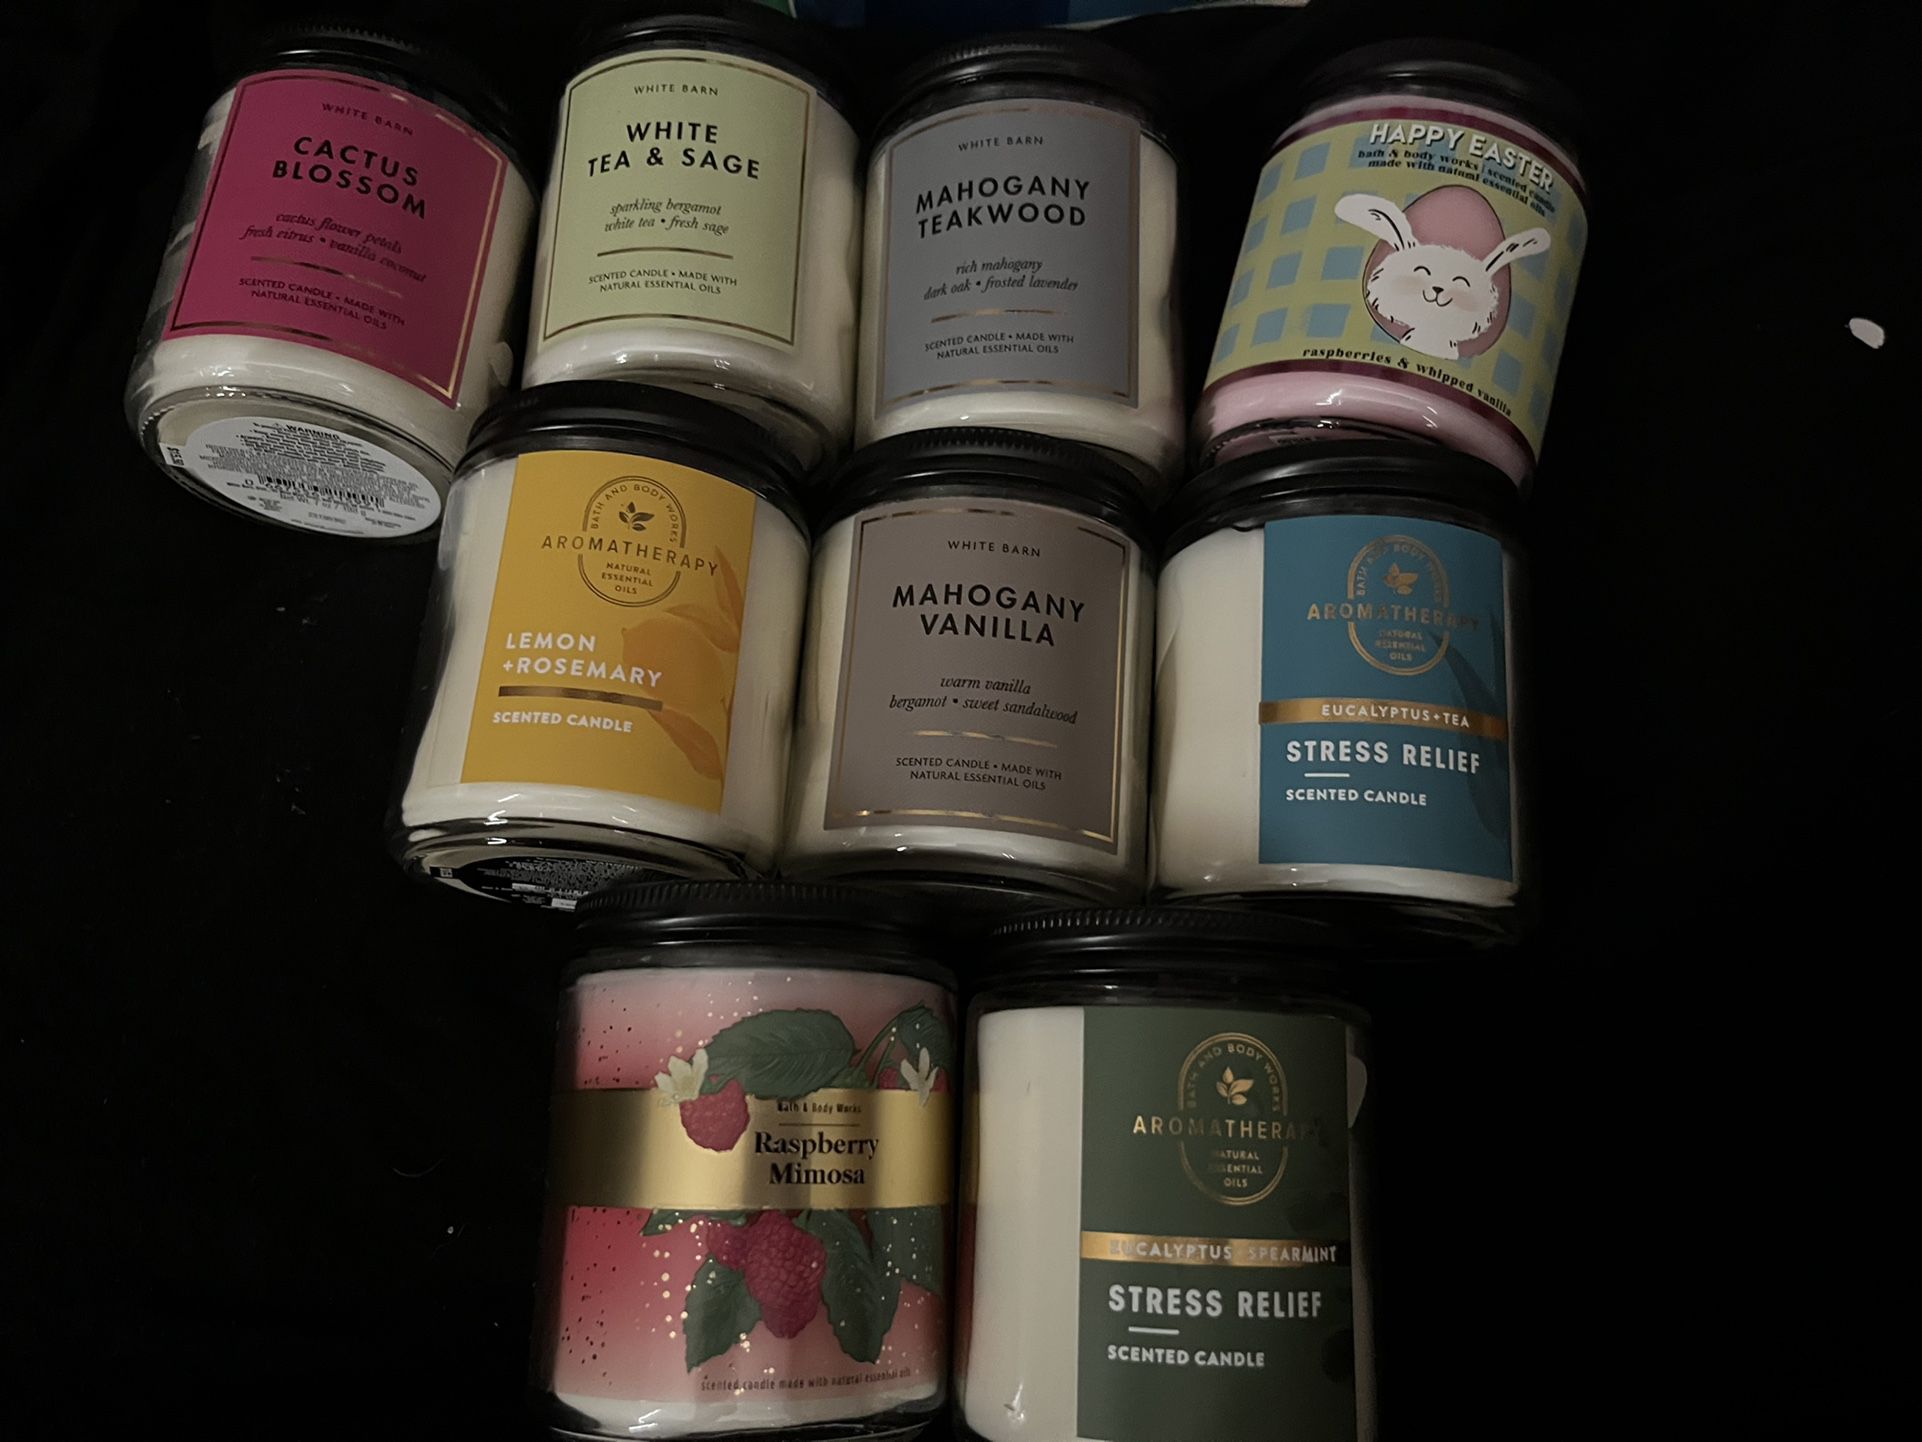 Bath and Body Single Wick candles 